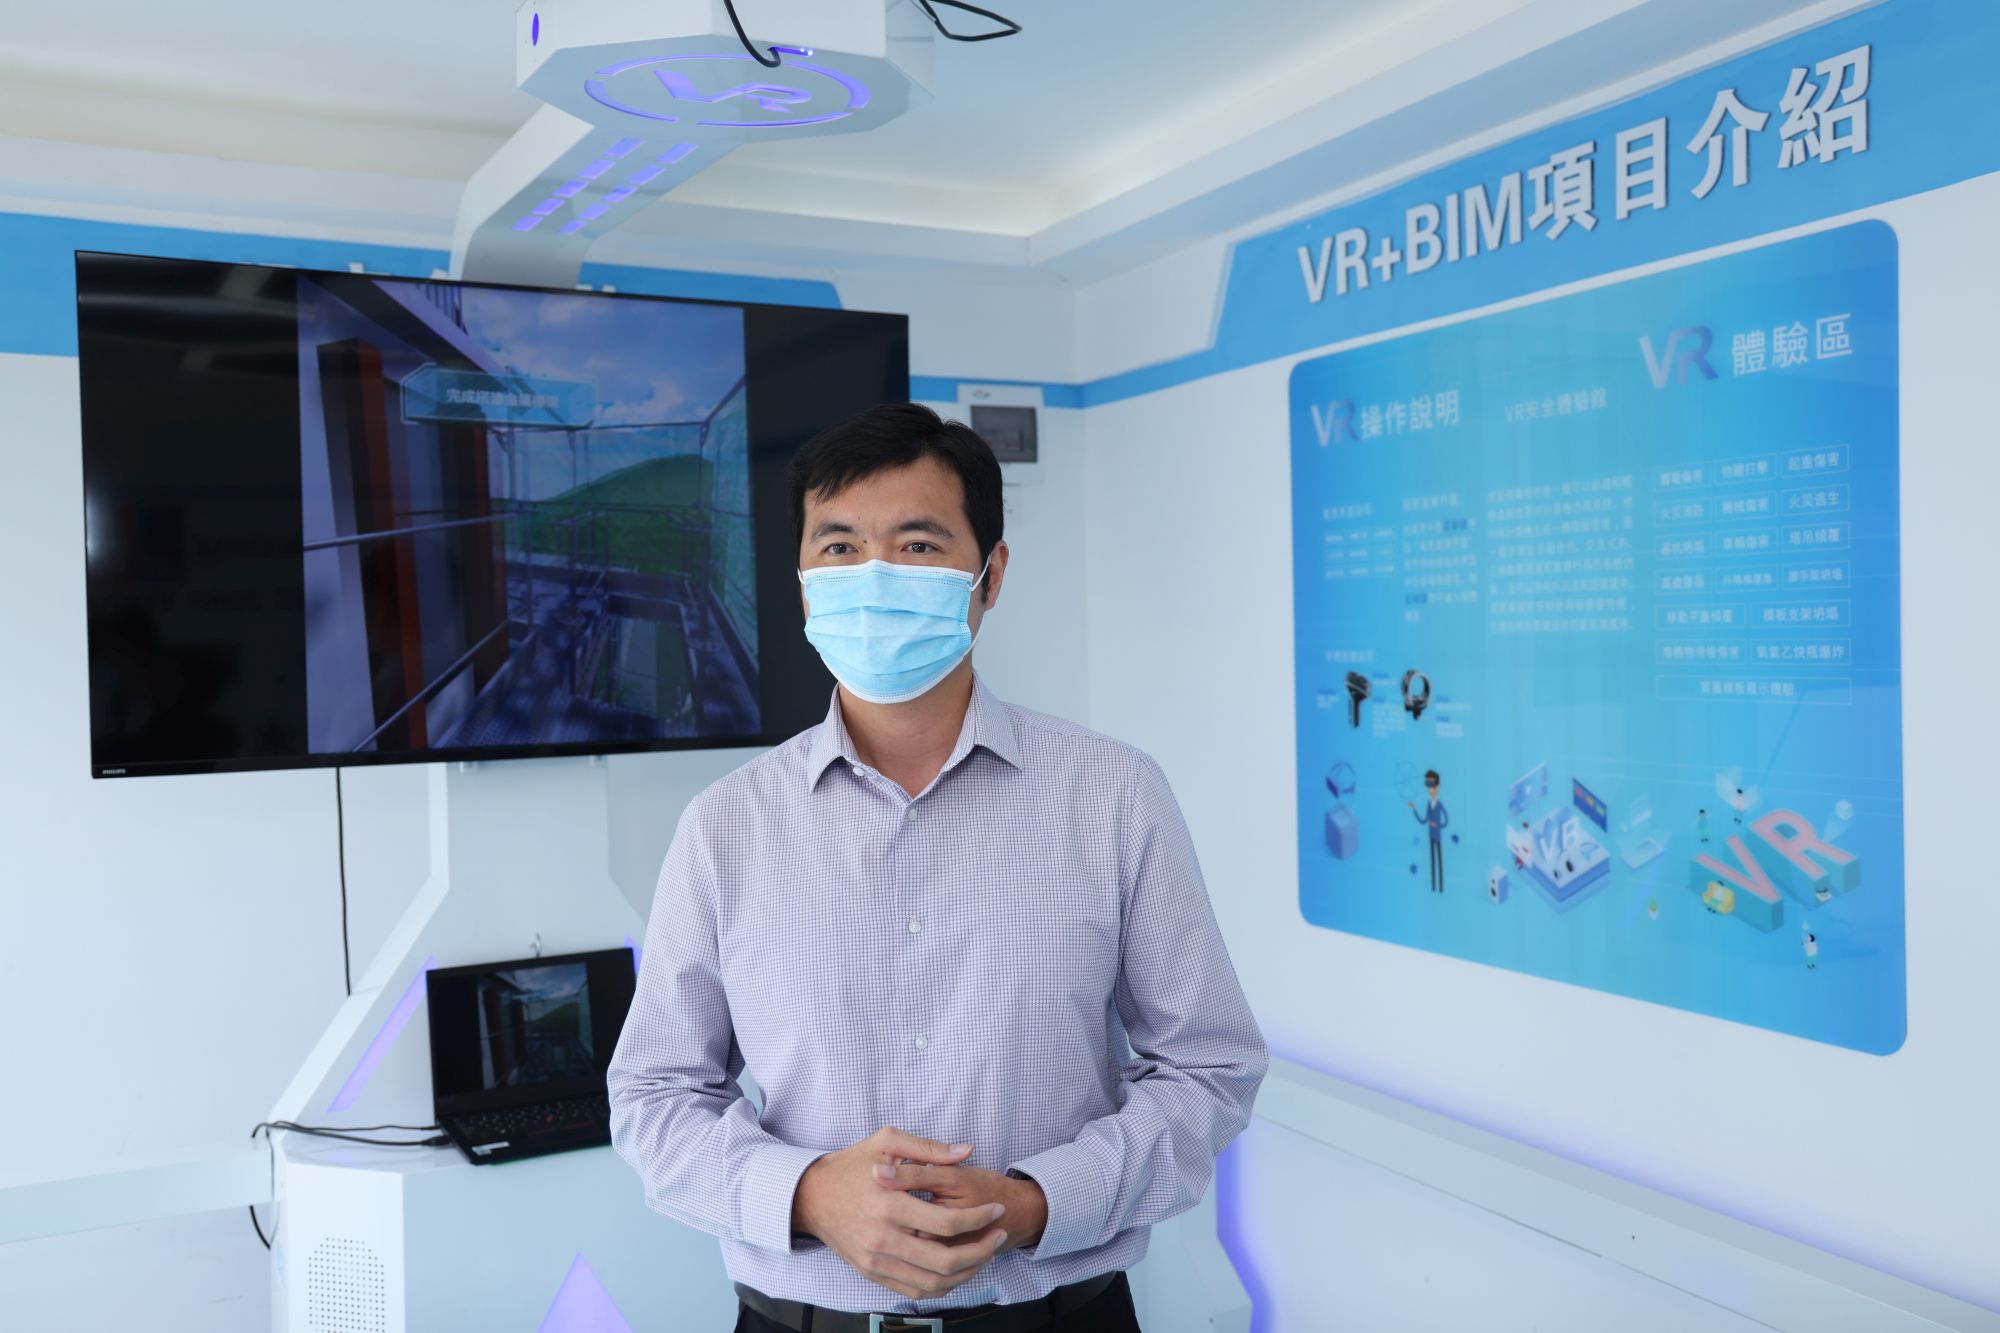 Chief Engineer of the WSD, Mr LIN Tang-tai says that virtual reality (VR) safety training has been widely adopted at many construction sites.